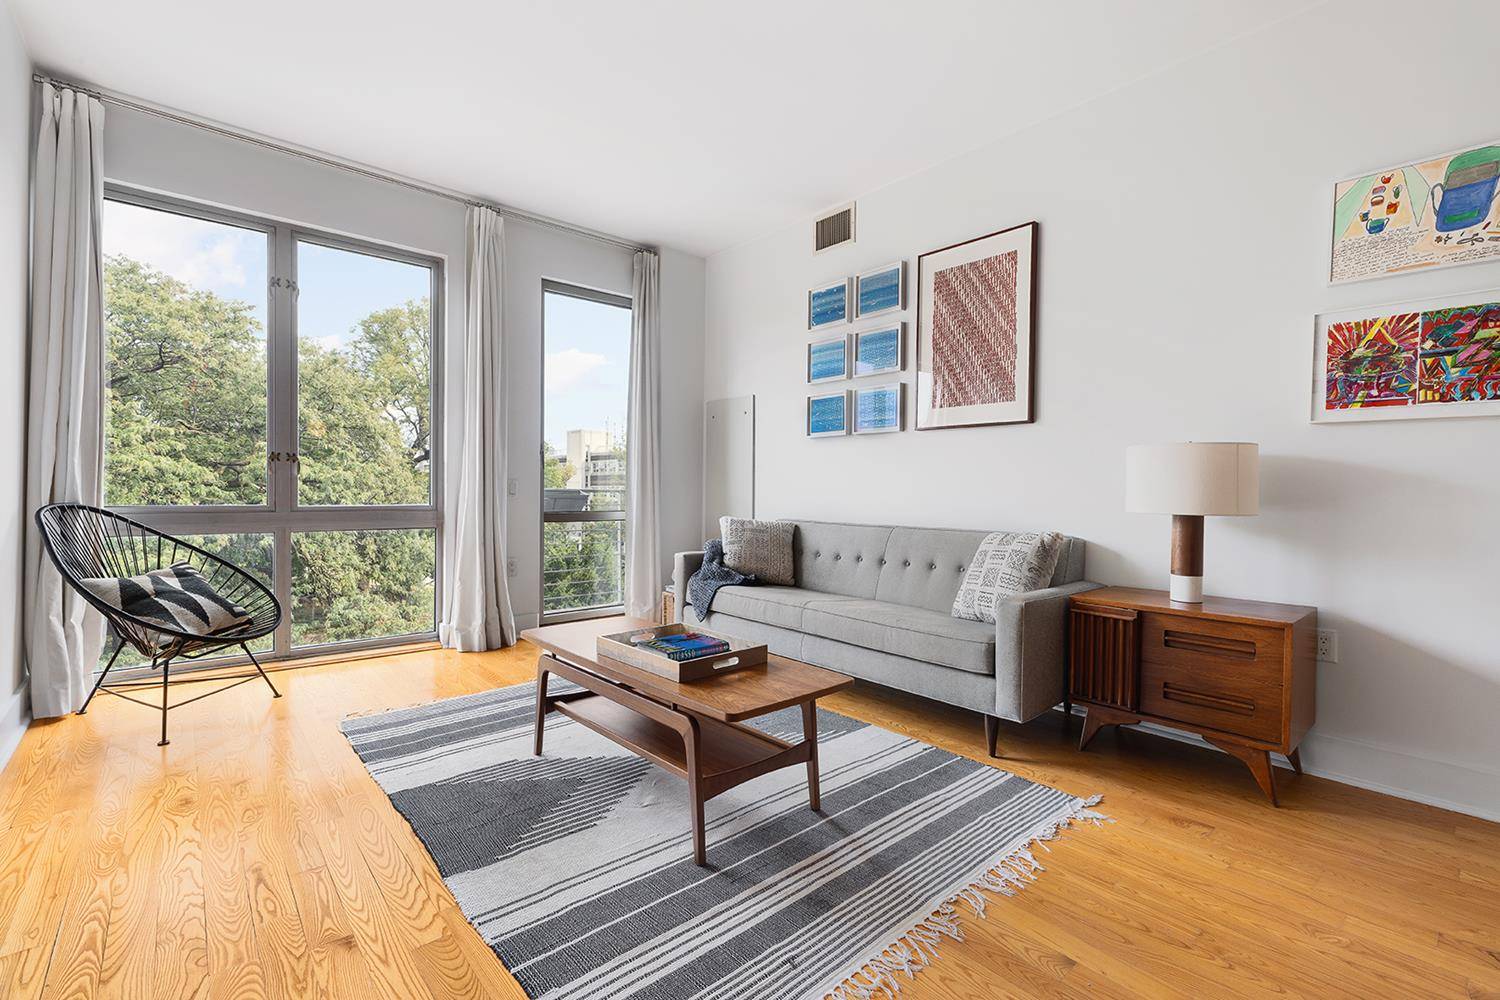 Modern amp ; minimally designed 1 bedroom home with private outdoor space directly facing McCarren Park.